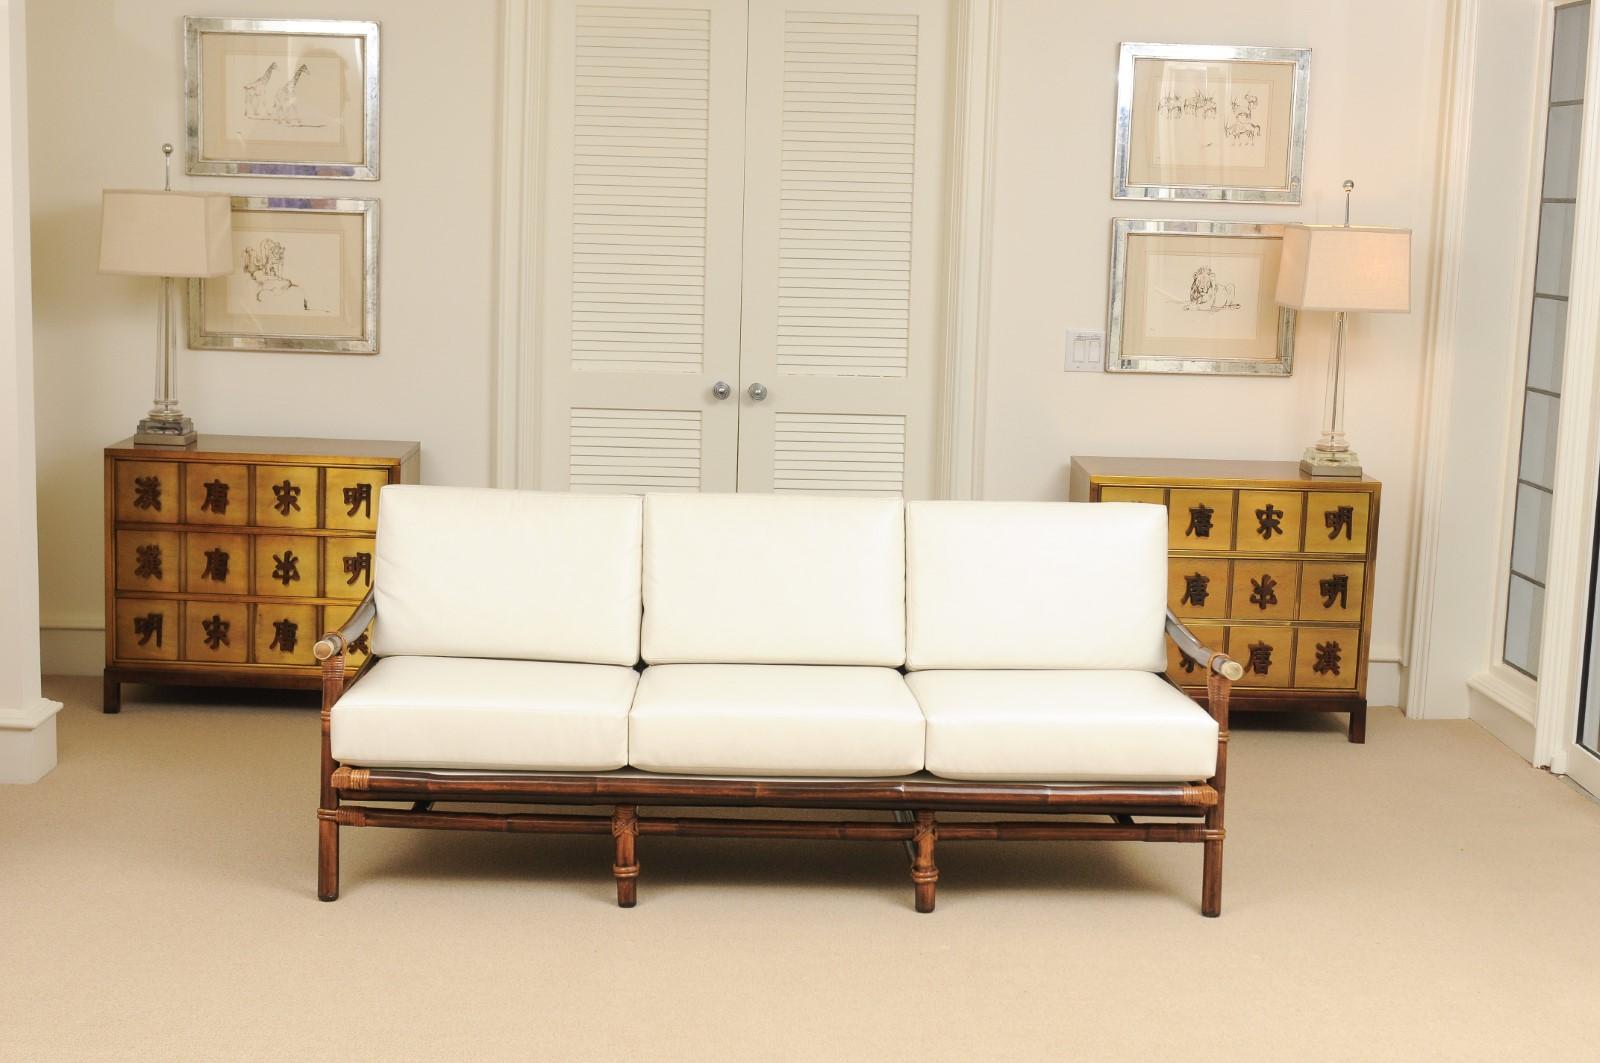 Rare Restored Campaign Sofa by John Wisner for Ficks Reed, circa 1954 For Sale 6